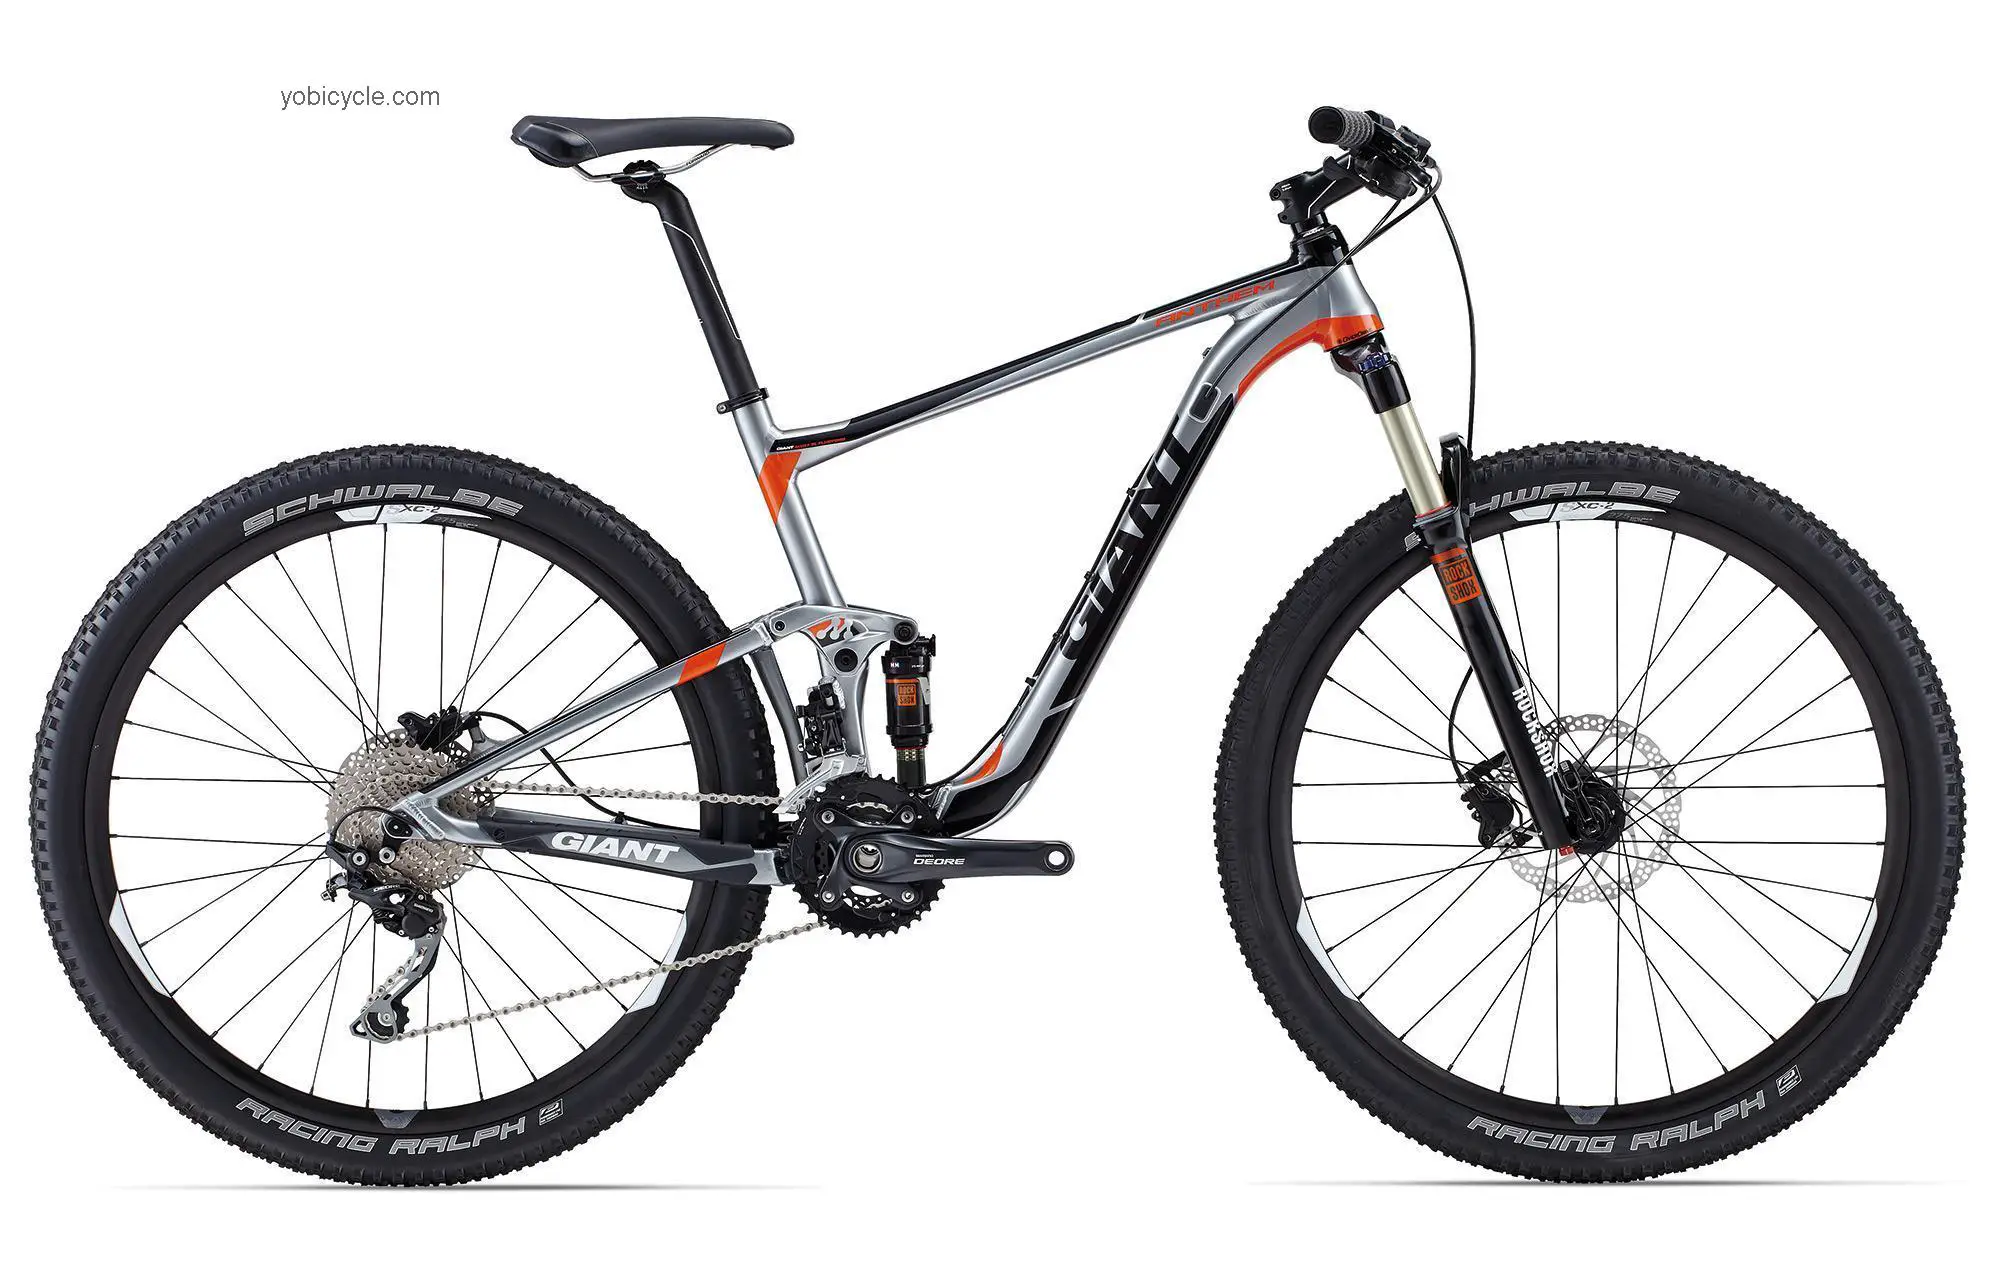 Giant Anthem 27.5 3 competitors and comparison tool online specs and performance